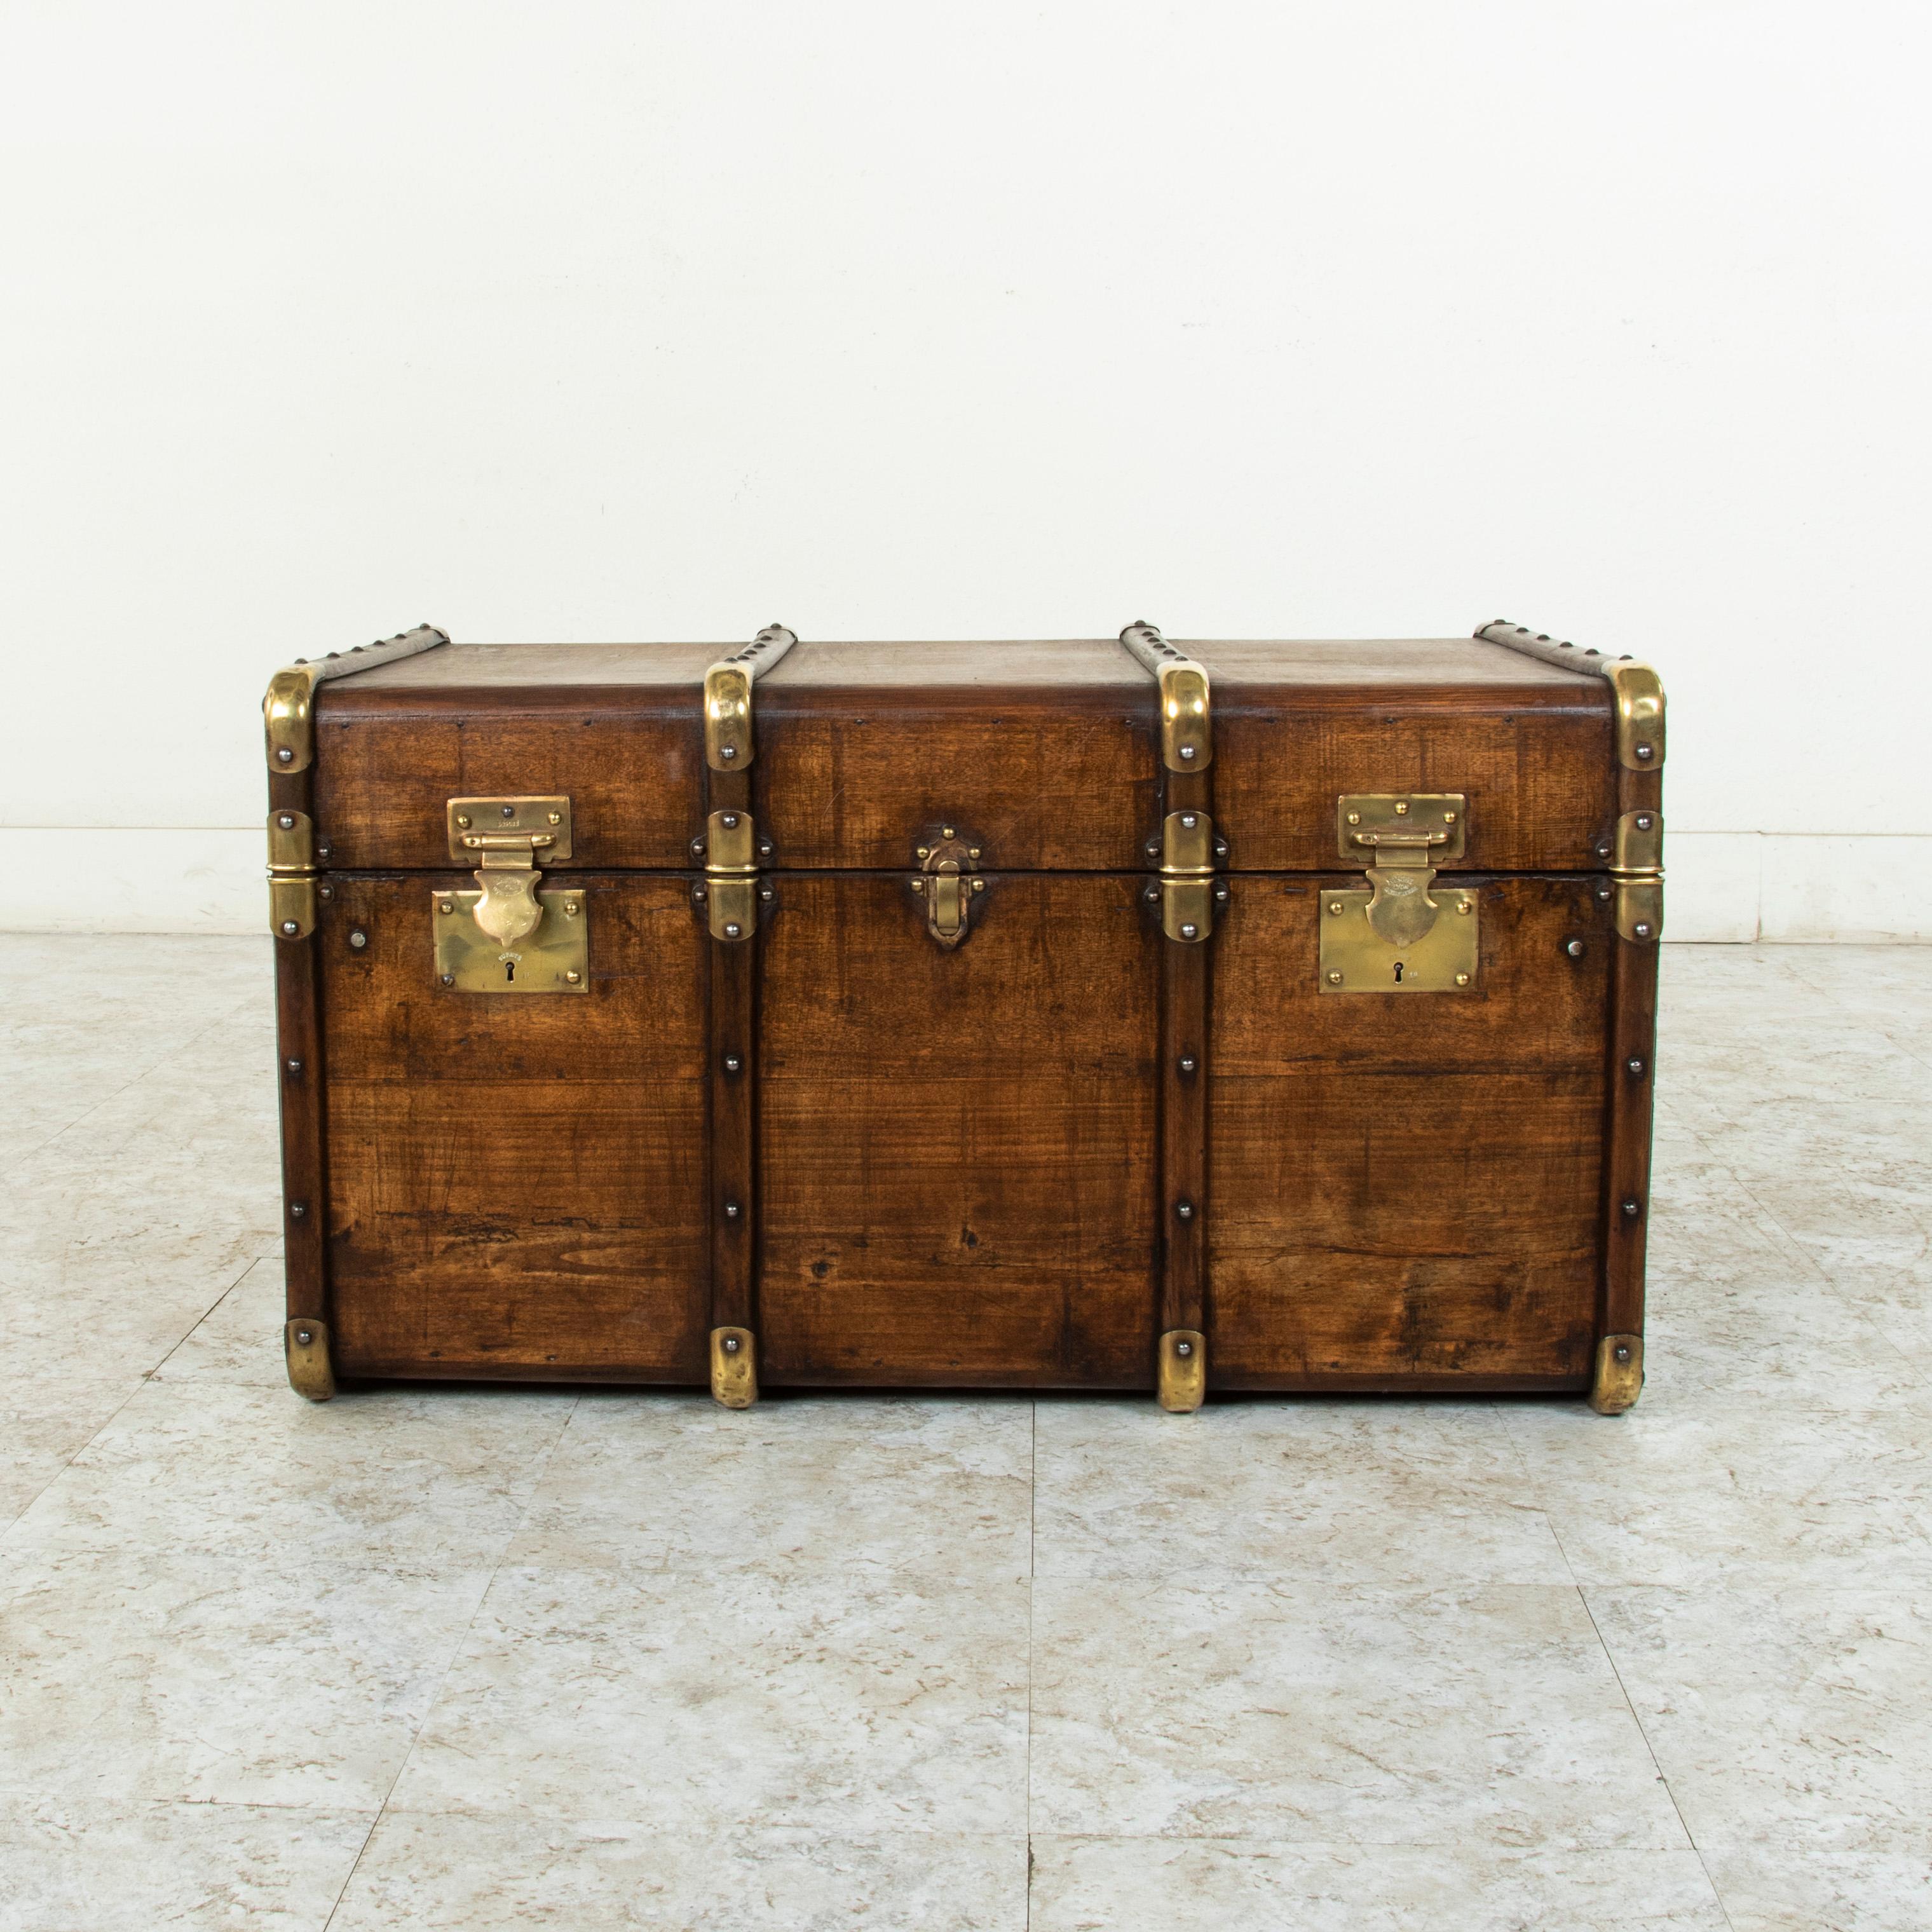 This French beech wood steam trunk from the turn of the twentieth century features wooden runners detailed with brass rivets. Its brass caps at the corners offered protection from damage when traveling, and its original leather handles are still